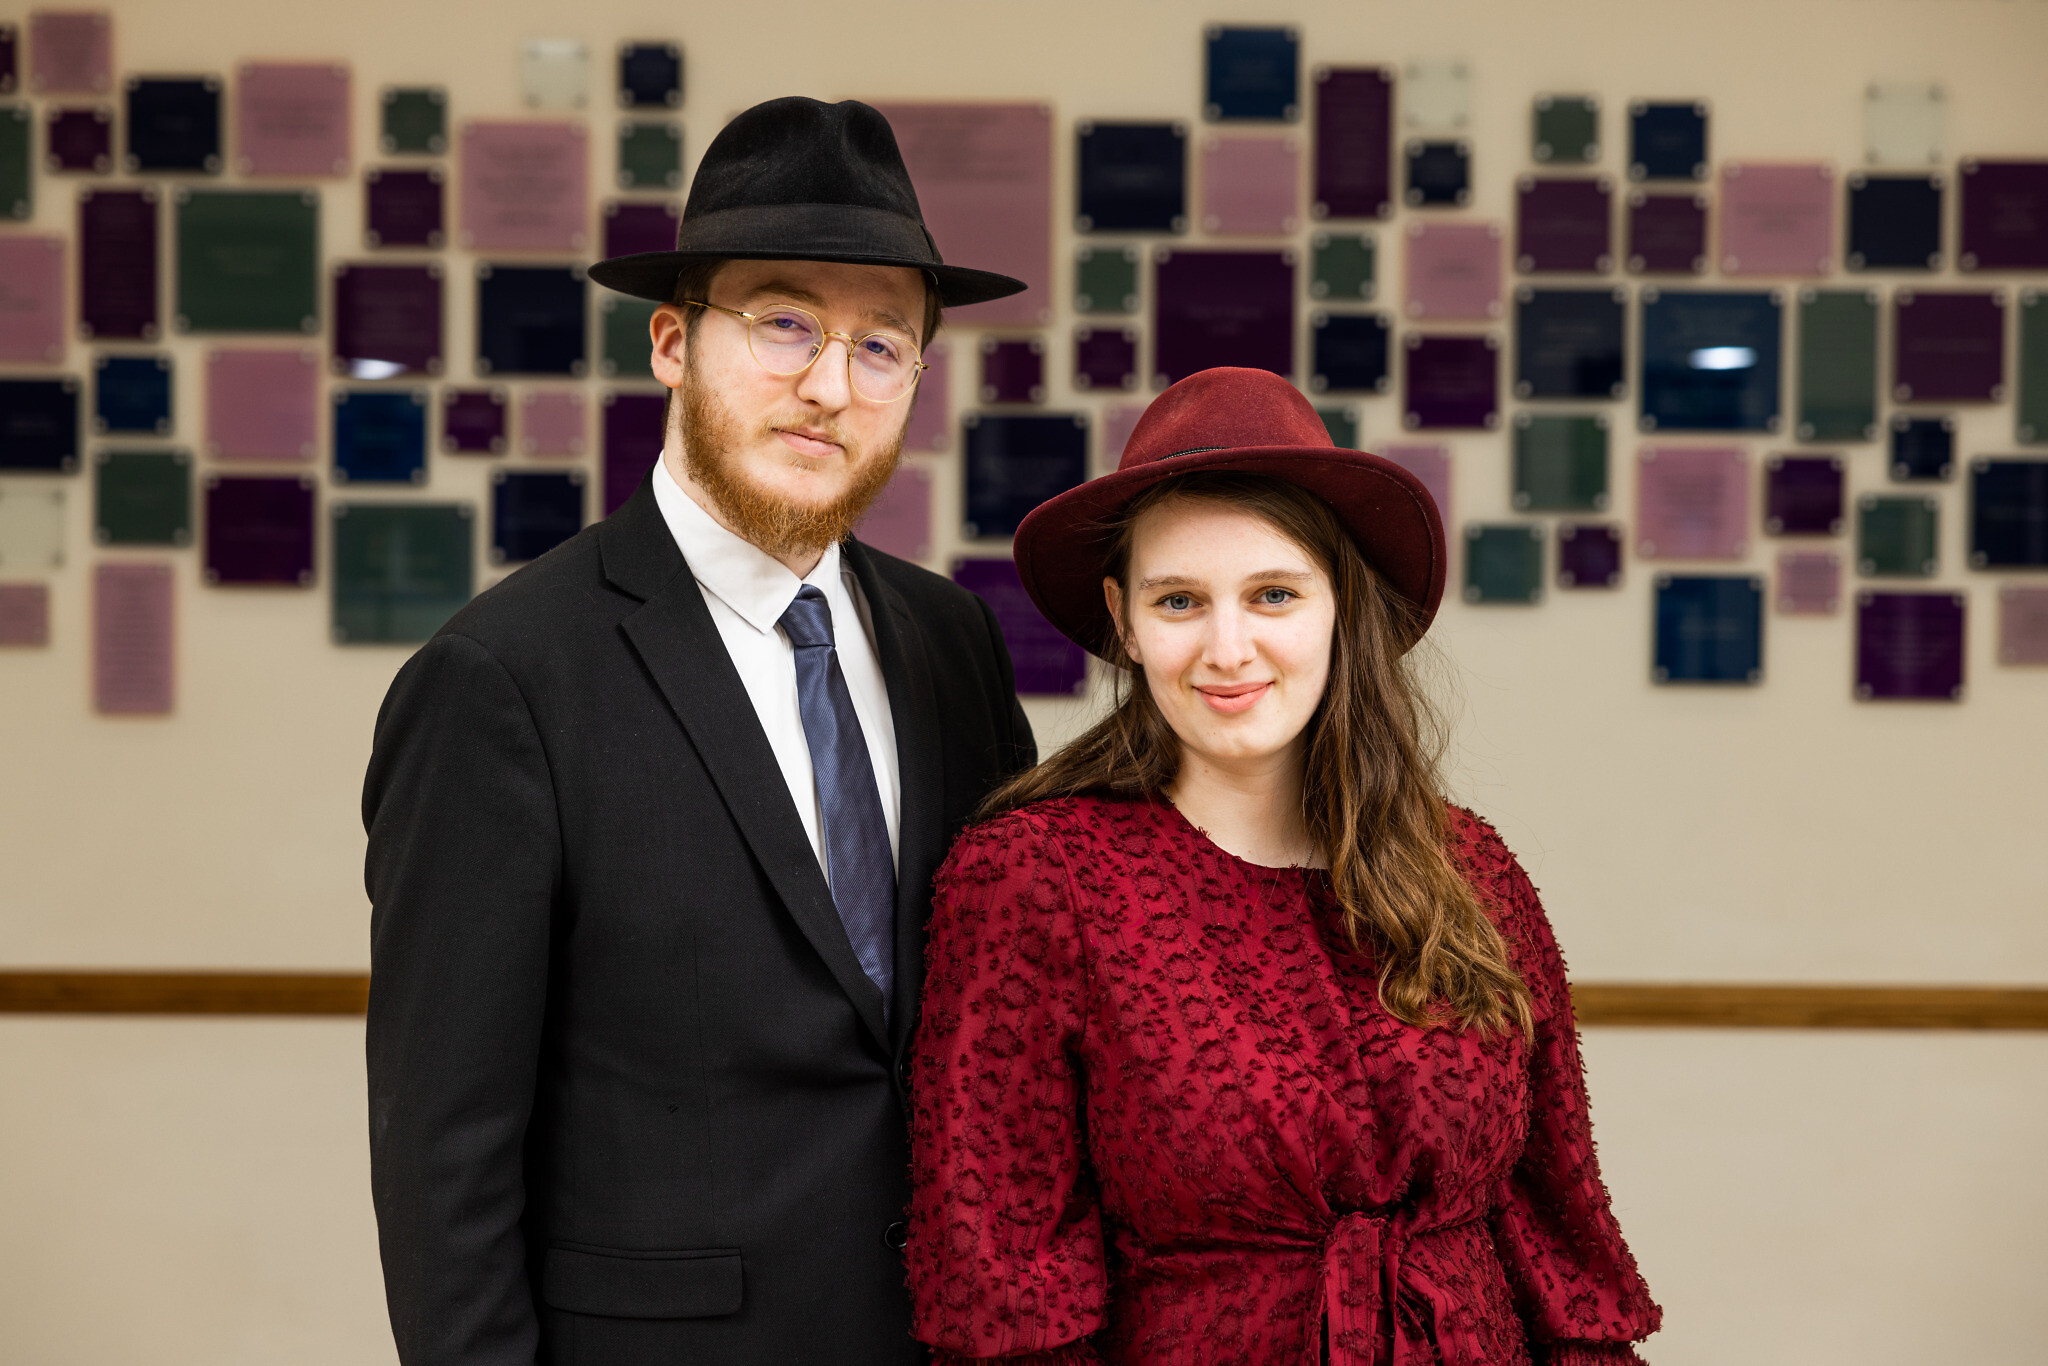 orthodox jewish wives & sexual relations